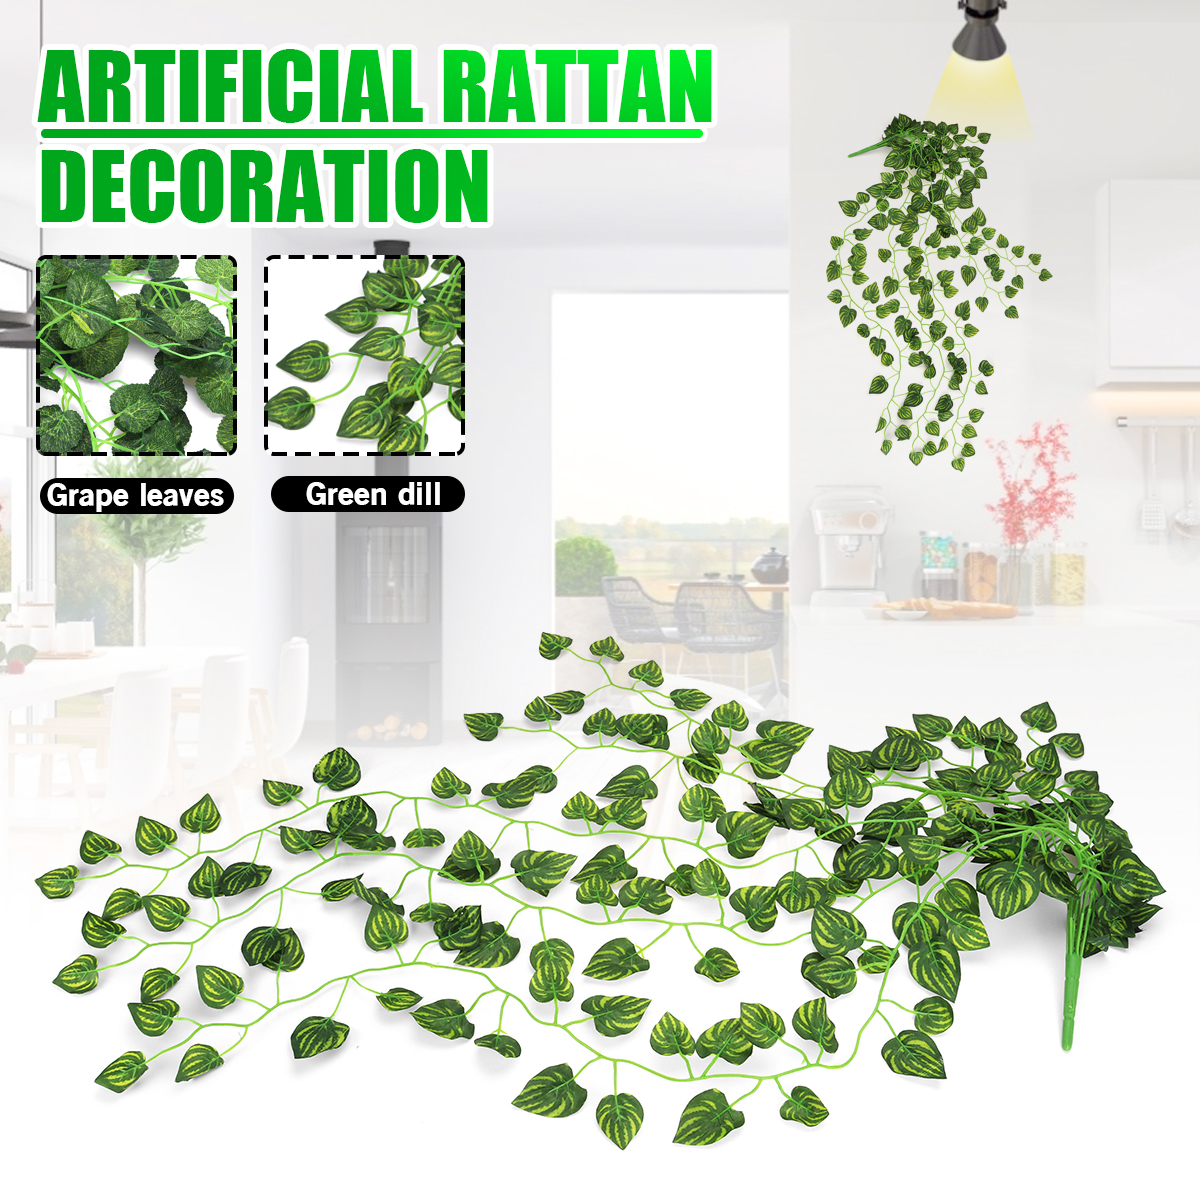 Green-Leaf-Artificial-Rattan-Simulation-Plants-Home-Wall-Decorations-1665938-1